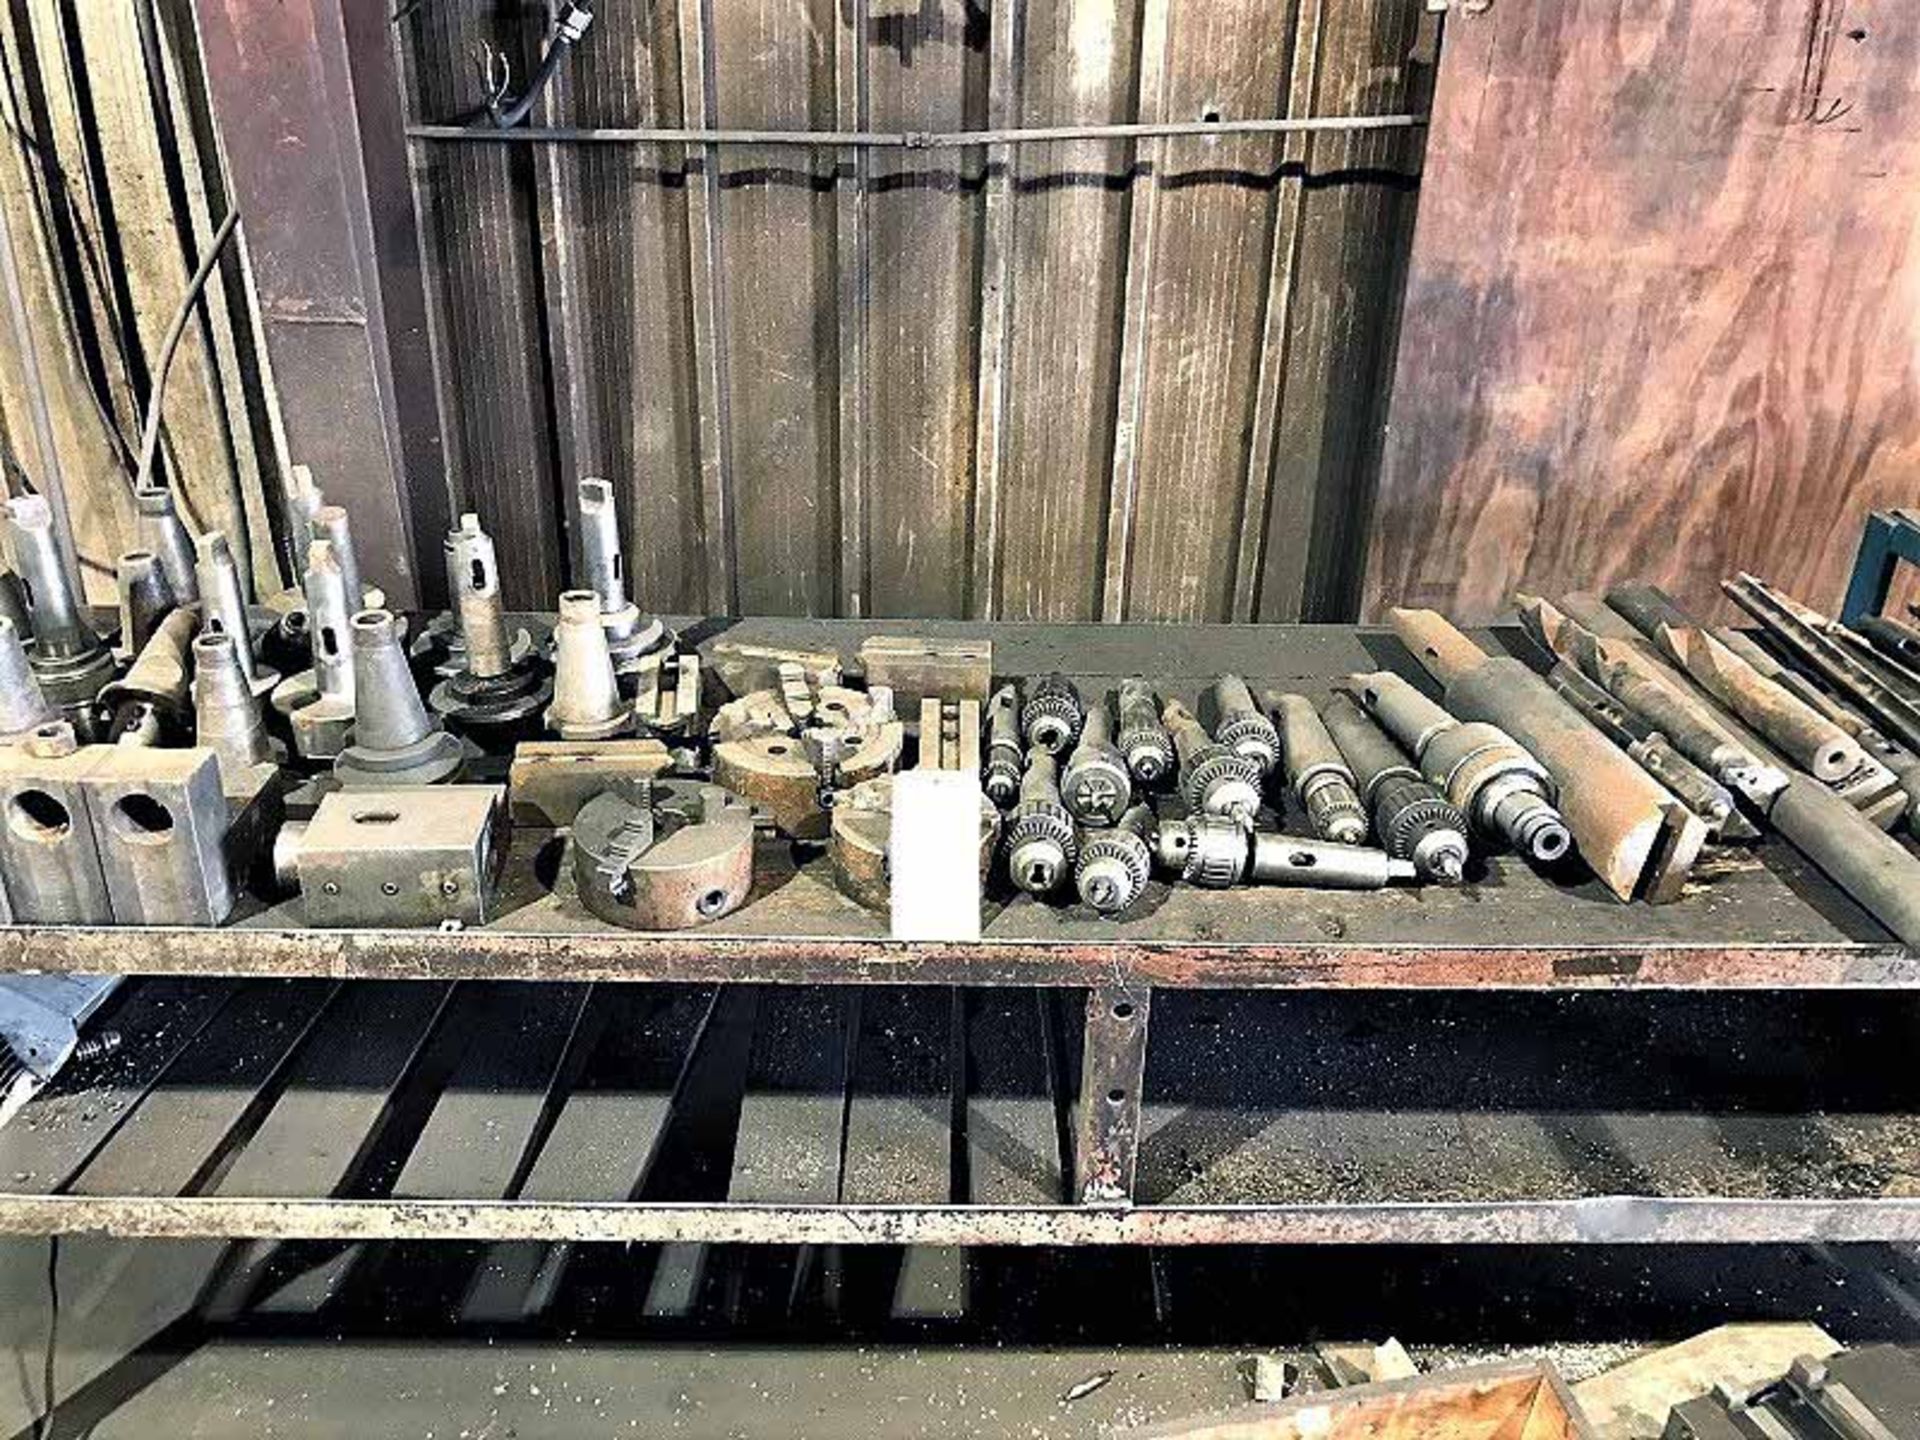 LOT CONSISTING OF: centers, chucks, drilling chuck, drills, spade drill holders, misc. (must be